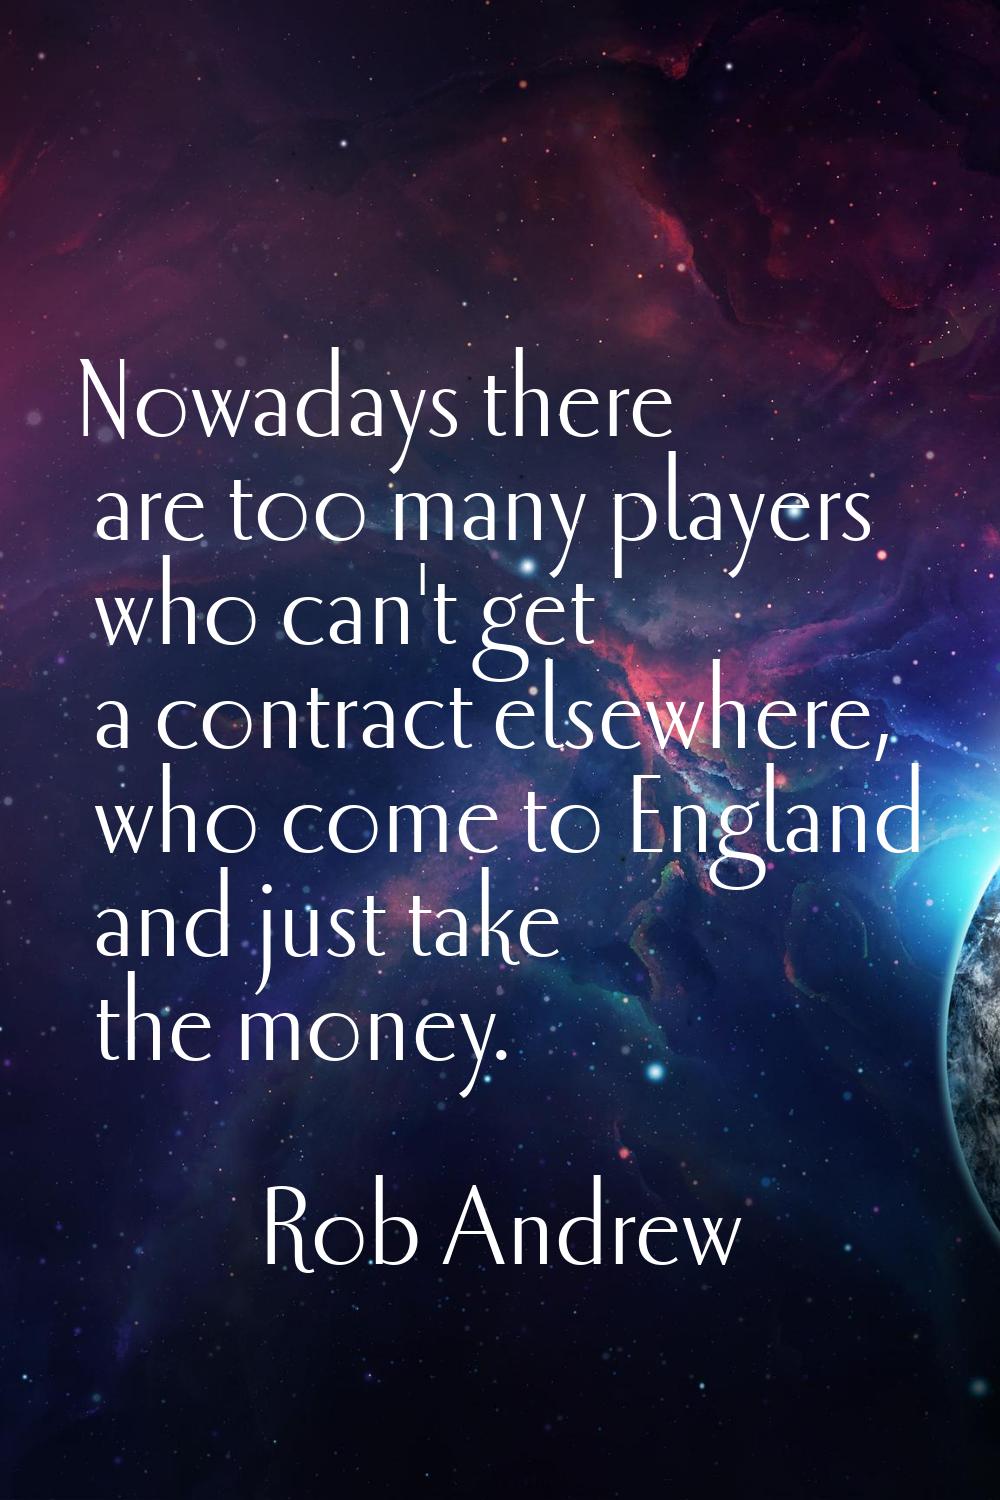 Nowadays there are too many players who can't get a contract elsewhere, who come to England and jus